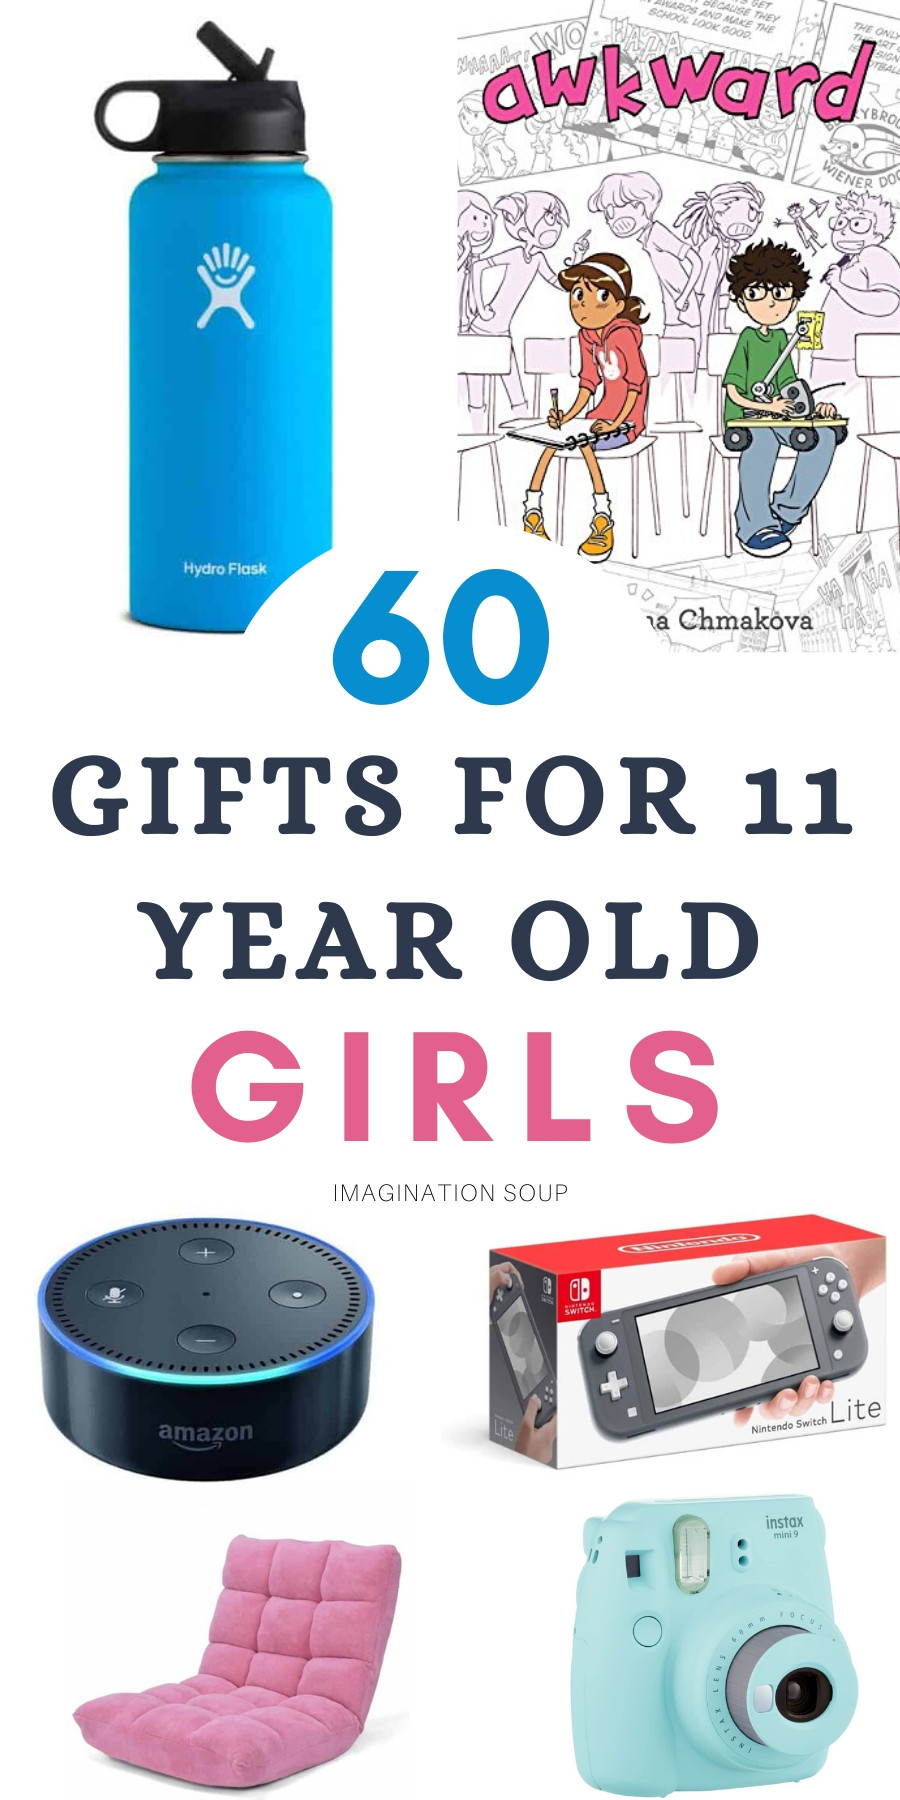 Gift Ideas For 11 Year Old Girls
 Gifts for 11 Year Old Girls